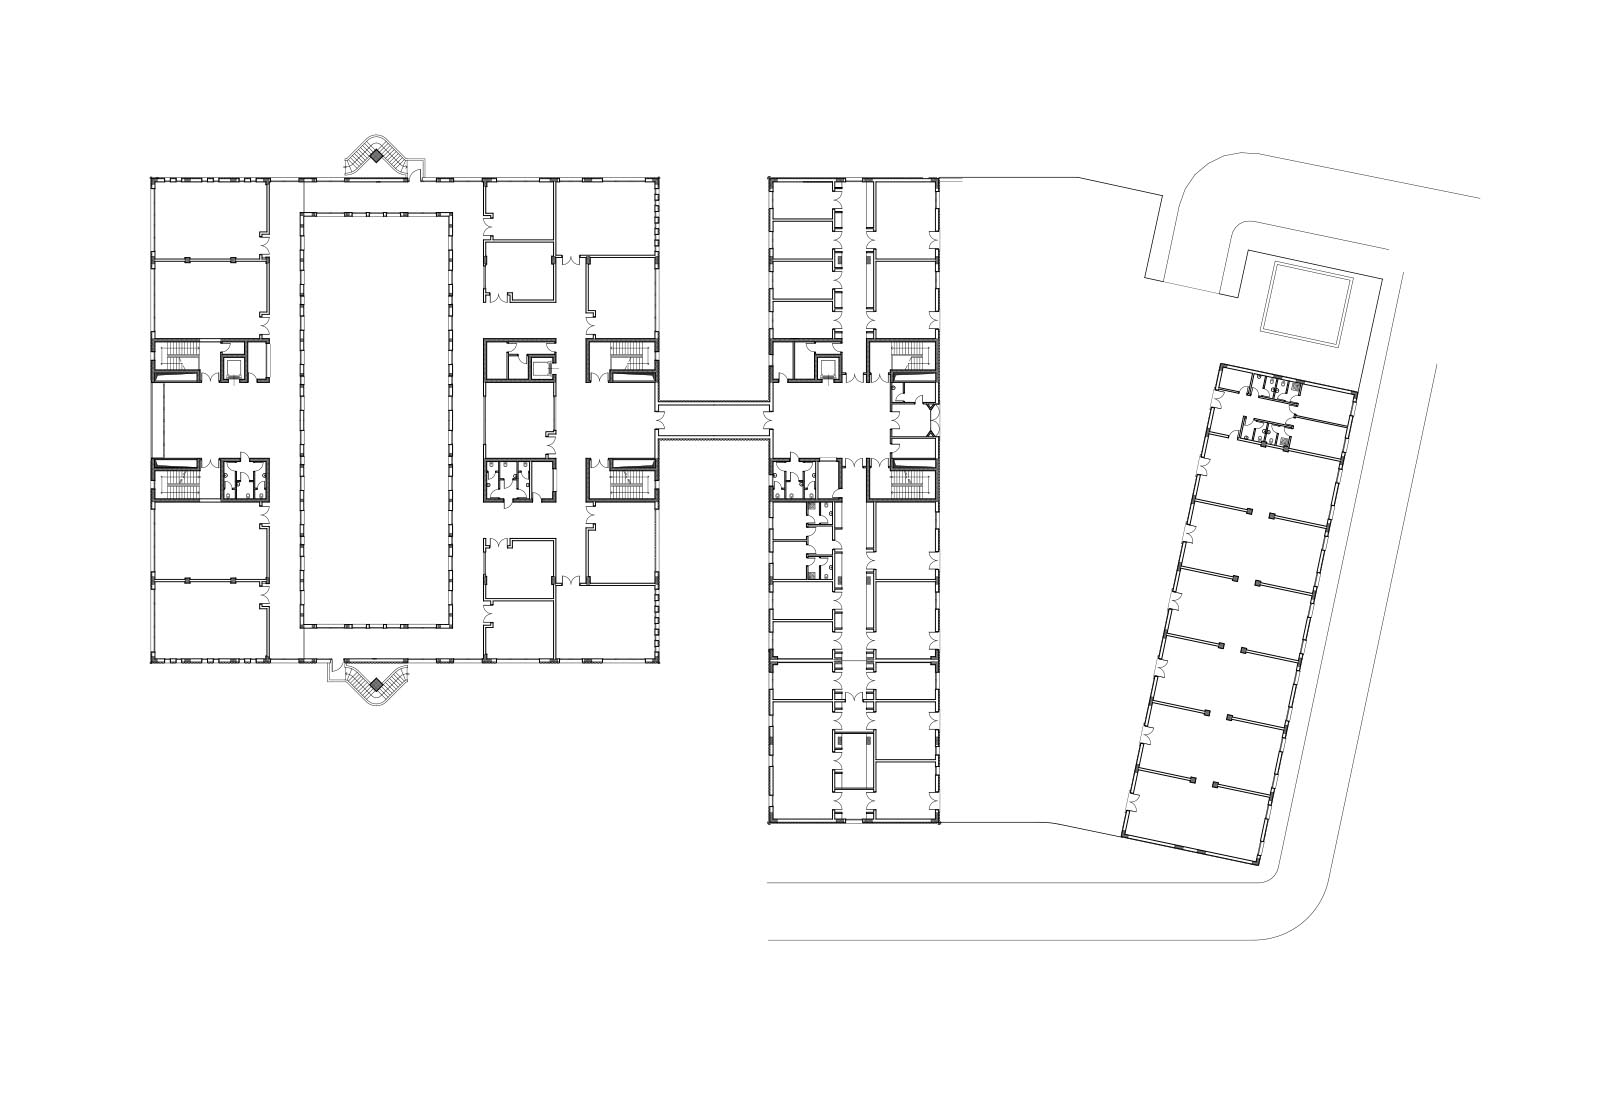 Faculty of Veterinary in Matelica - General project plan first floor